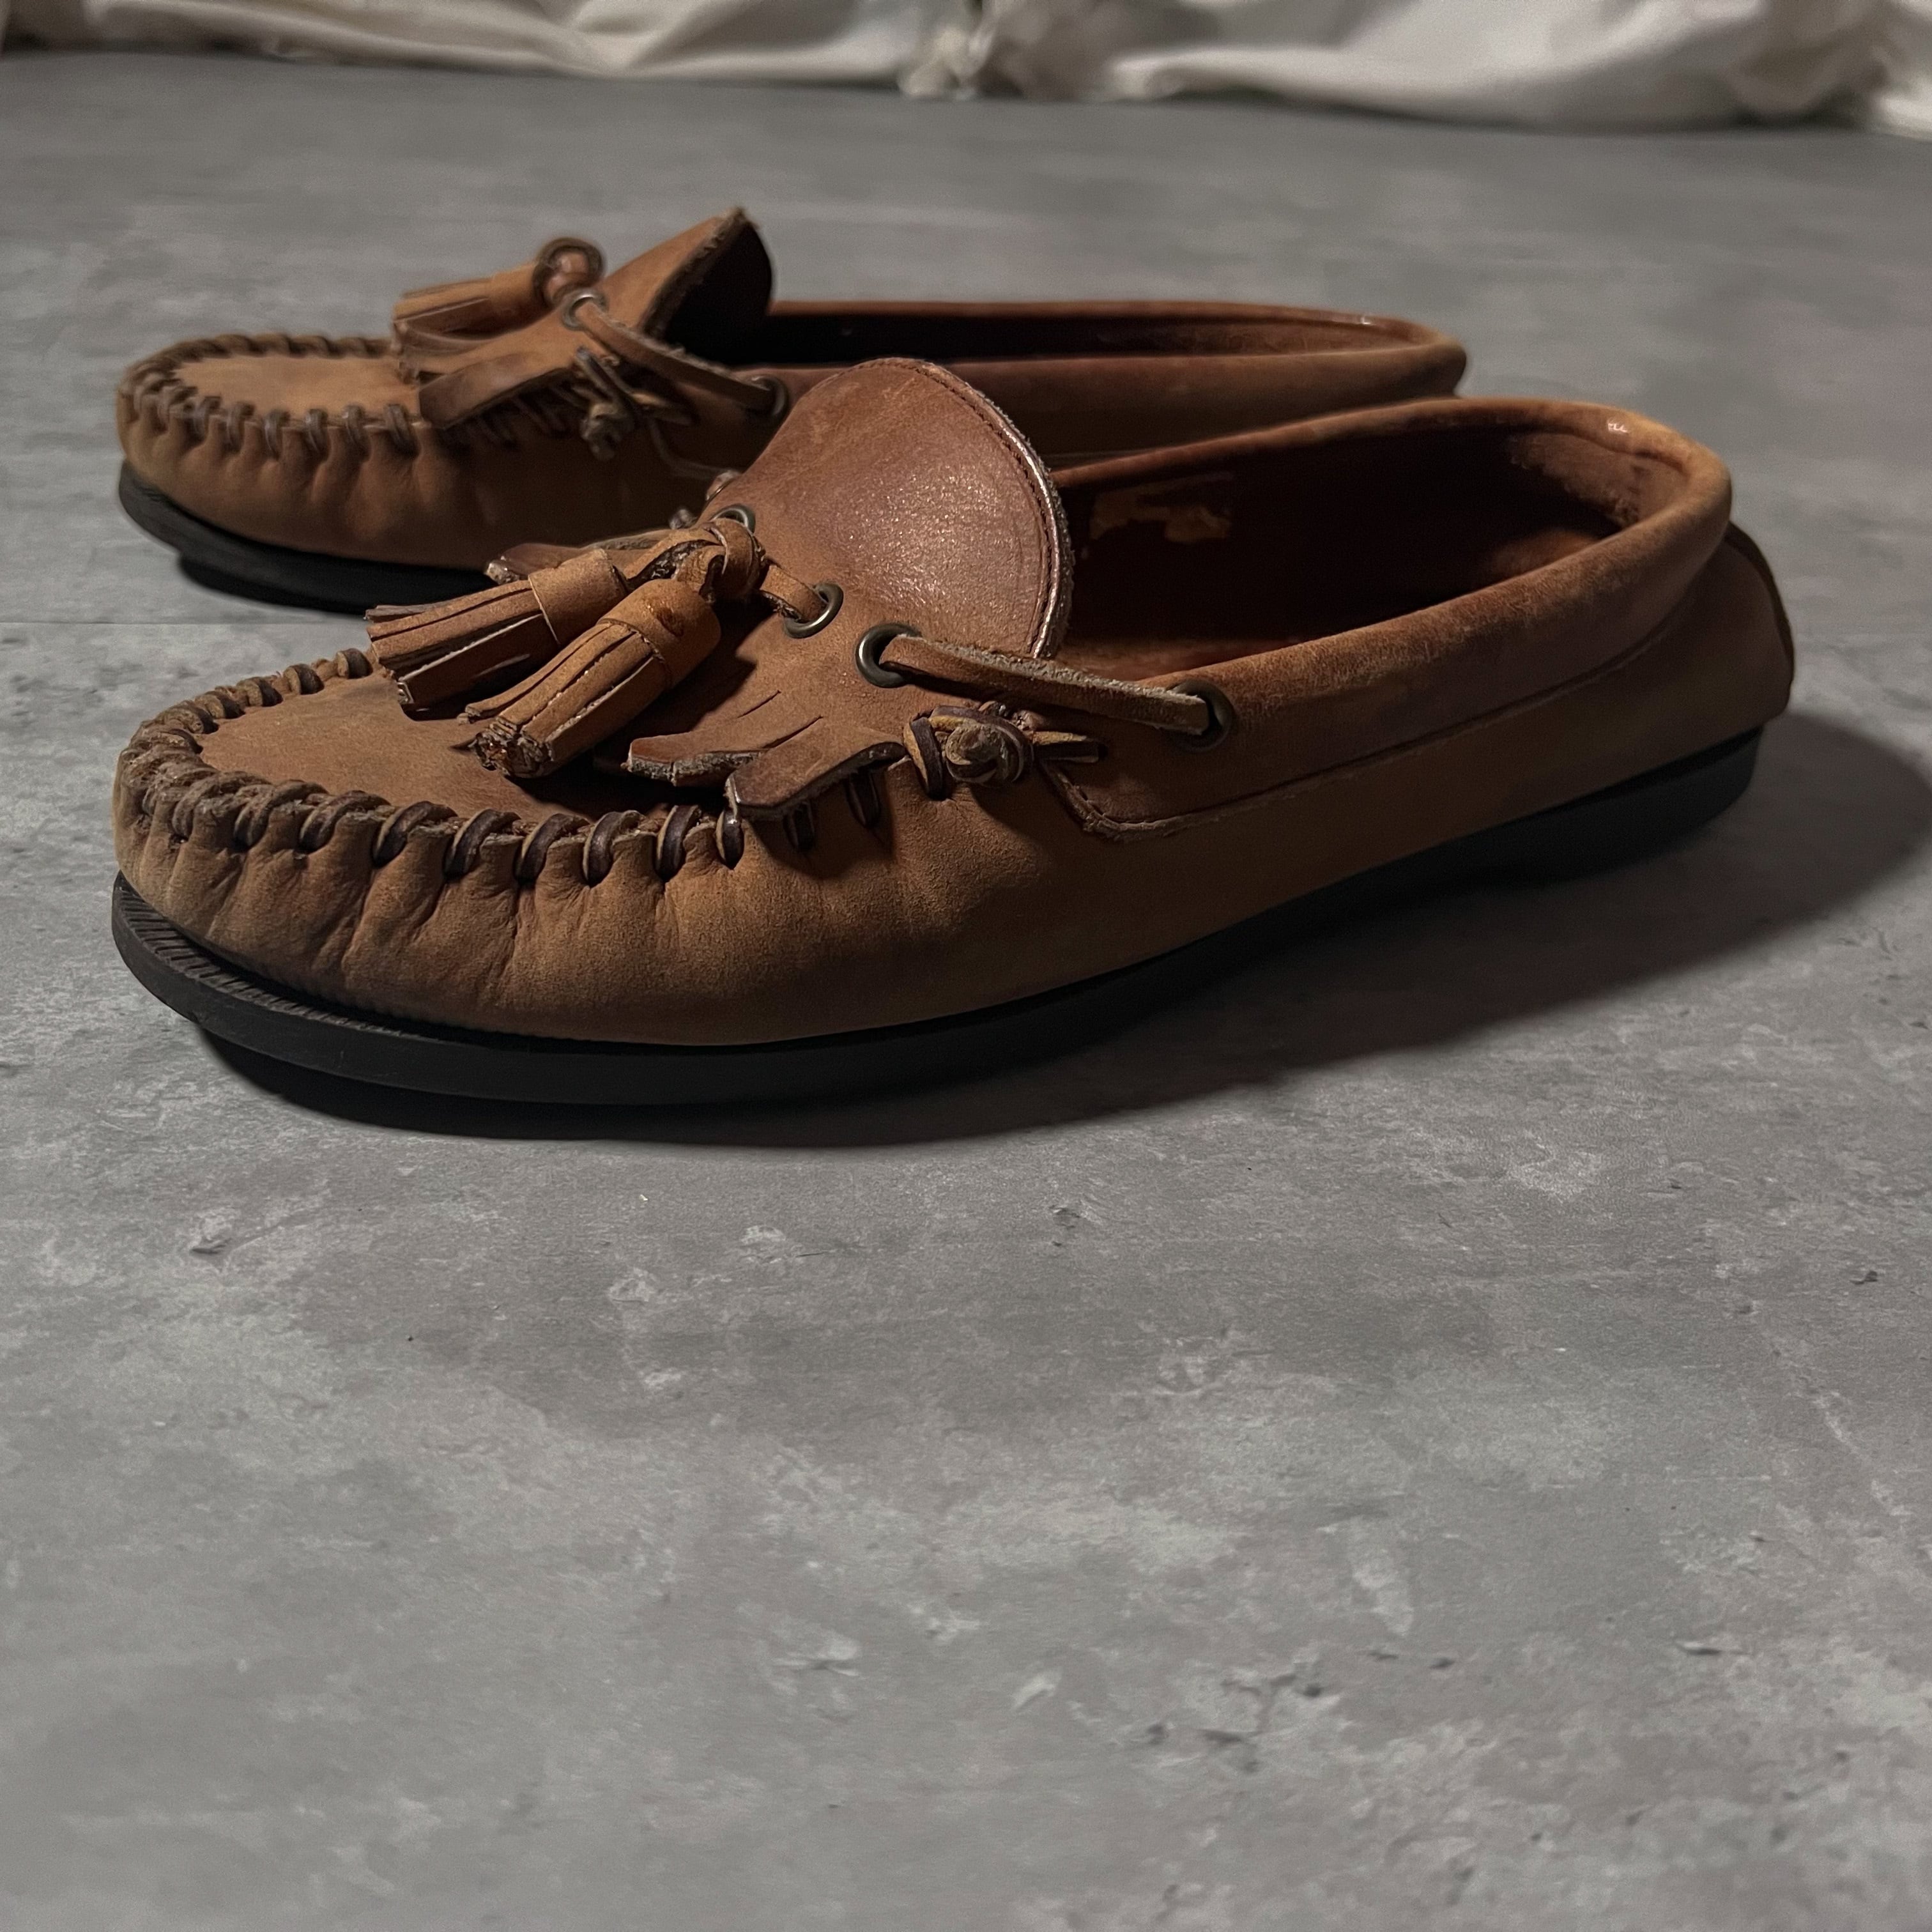 89s-92s “polo country” brown leather moccasin shoes 90年代 ポロ